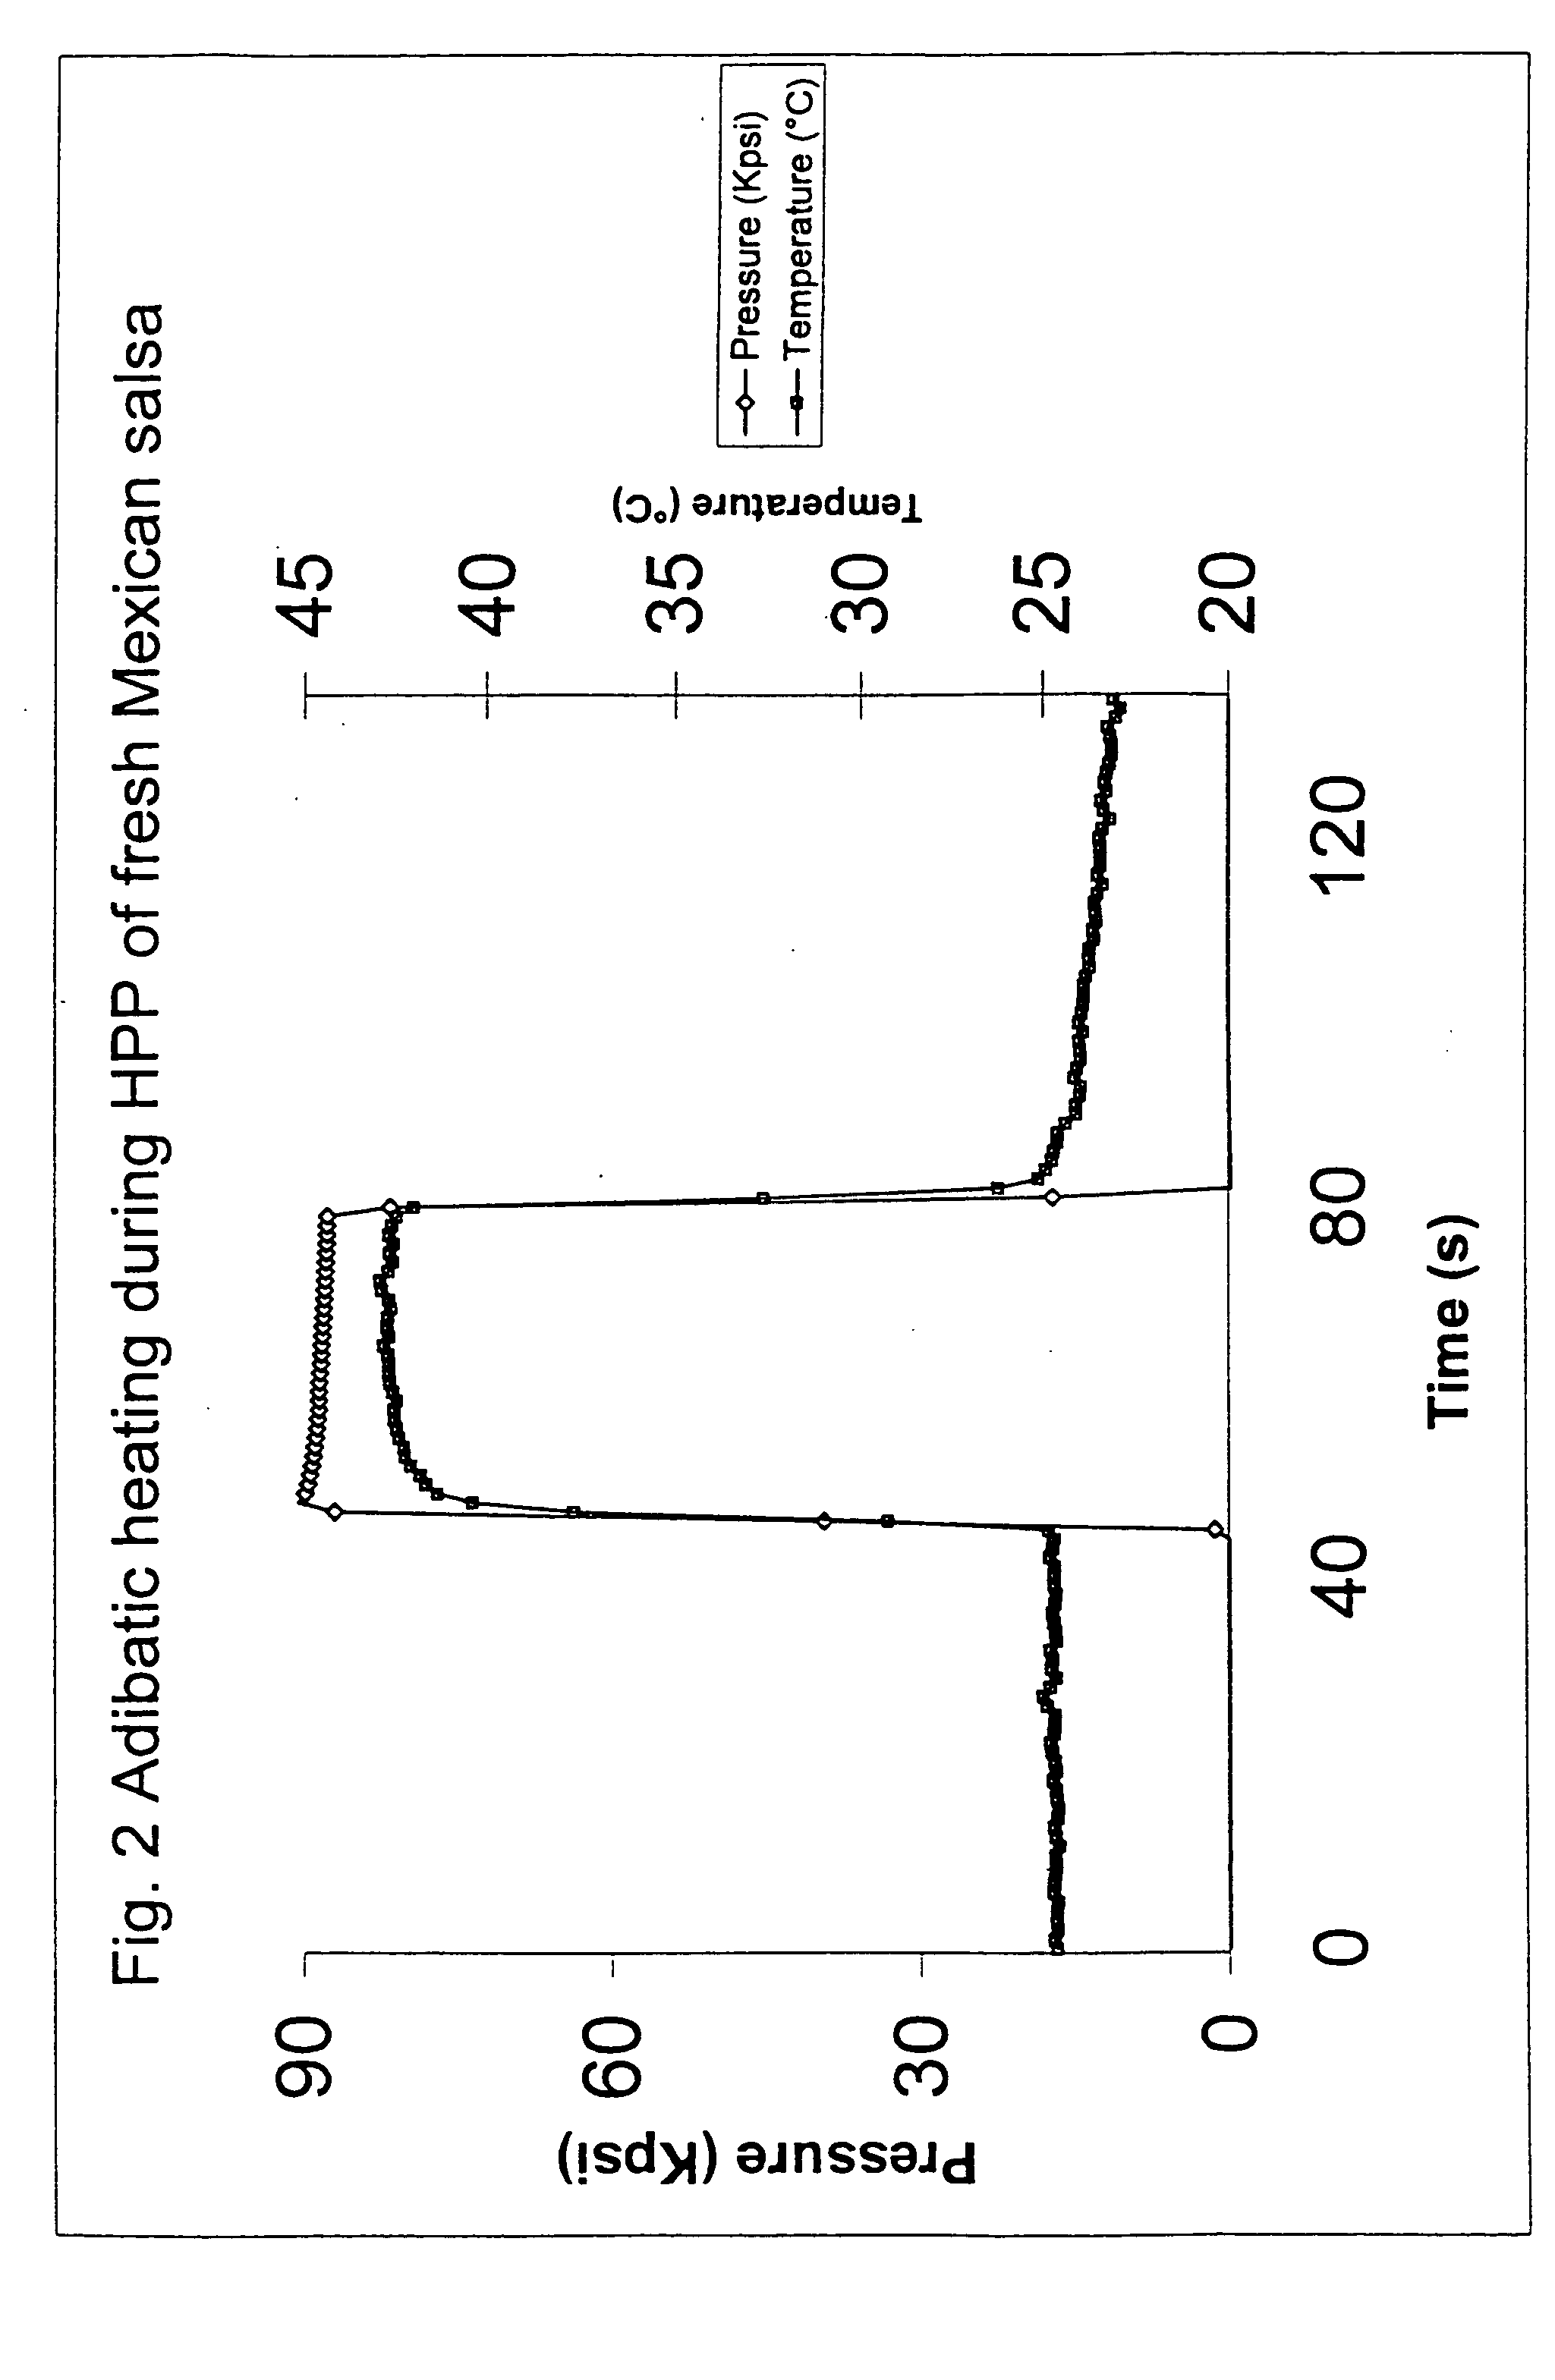 Method to extend the shelf-life of food products using hydrostatic high-pressure processing